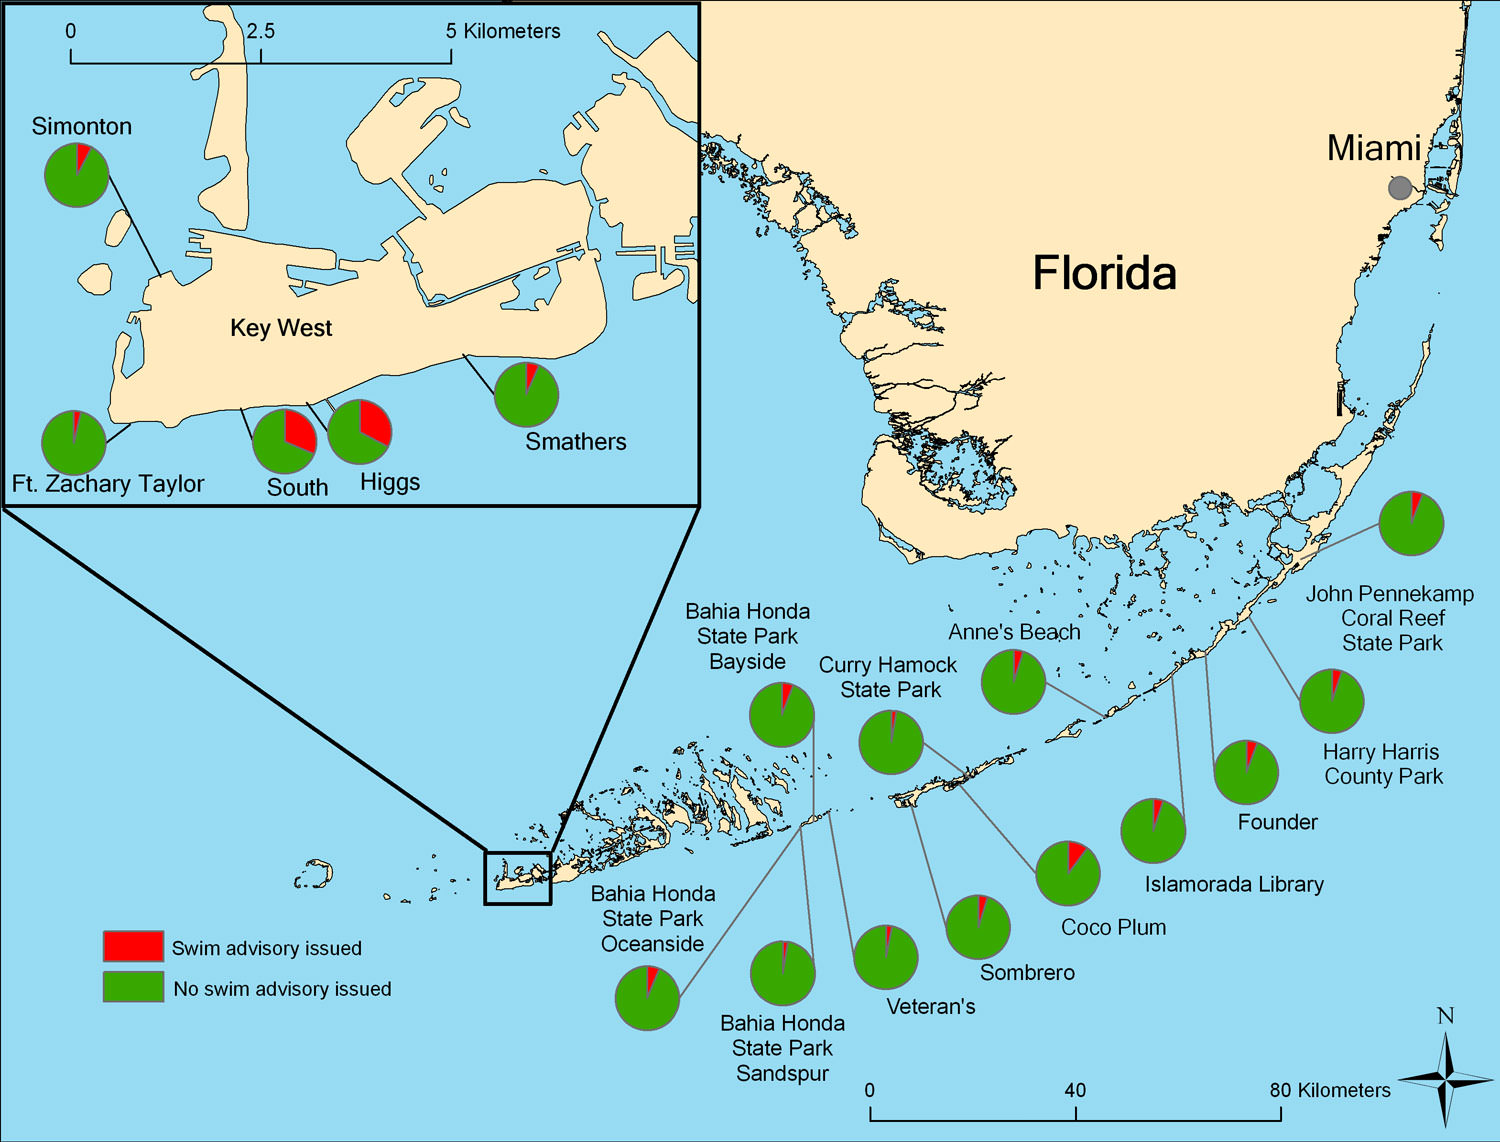 Swim advisories issued in southern Florida. Pie charts represent the mean annual proportion of time per condition per beach from 2003 to 2009